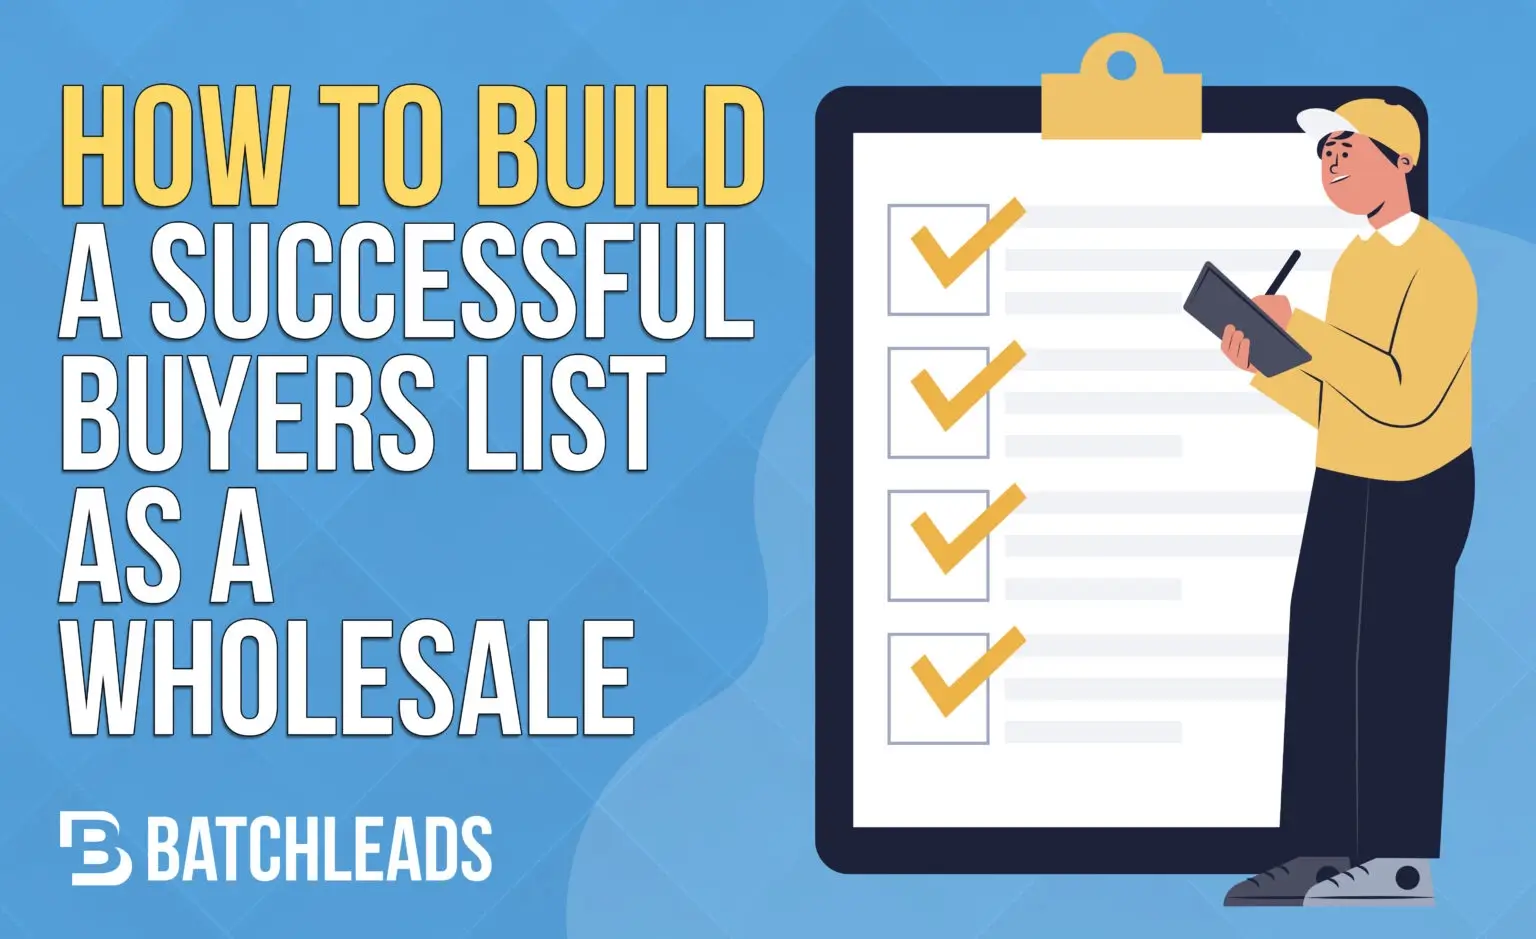 How To Build A Successful Buyers List As A Wholesaler